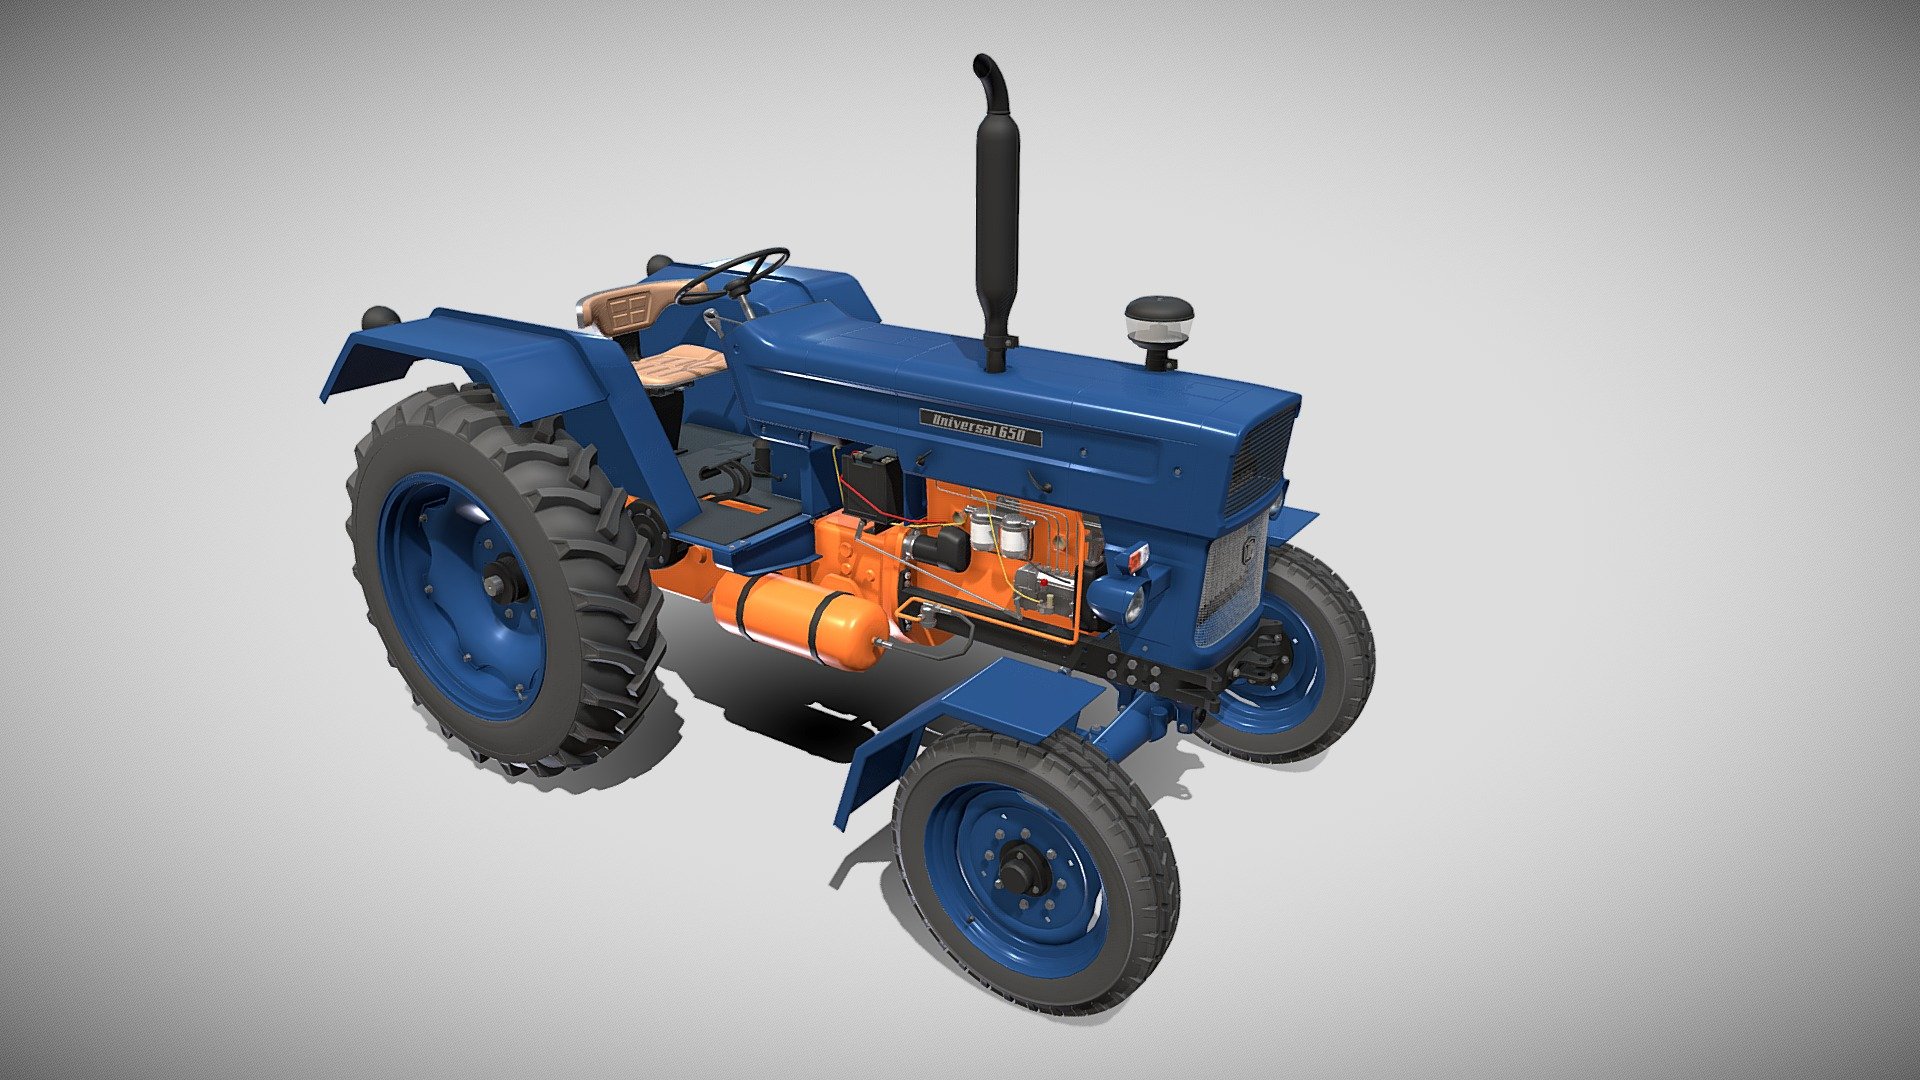 Highly detailed Tractor 3d model rendered with Cycles in Blender, as per seen on attached images.

The model is very intricately built, it has the transmission and engine, with cooling for oil and water, injection pump, fuel lines, compressed air circuit, electric circuit modeled. Some of these elements cannot be seen on the main renders, so I have also rendered the chassis in order to showcase them.

The 3d model is scaled to original size in Blender.

File formats:

-.blend, rendered with cycles, as seen in the images;

-.obj, with materials applied;

-.dae, with materials applied;

-.fbx, with materials applied;

-.stl;

Files come named appropriately and split by file format.

3D Software:

The 3D model was originally created in Blender 2.8 and rendered with Cycles.

Materials and textures:

The models have materials applied in all formats, and are ready to import and render, note that some minimal adjustments might be needed to look best in the renderer of choice 3d model